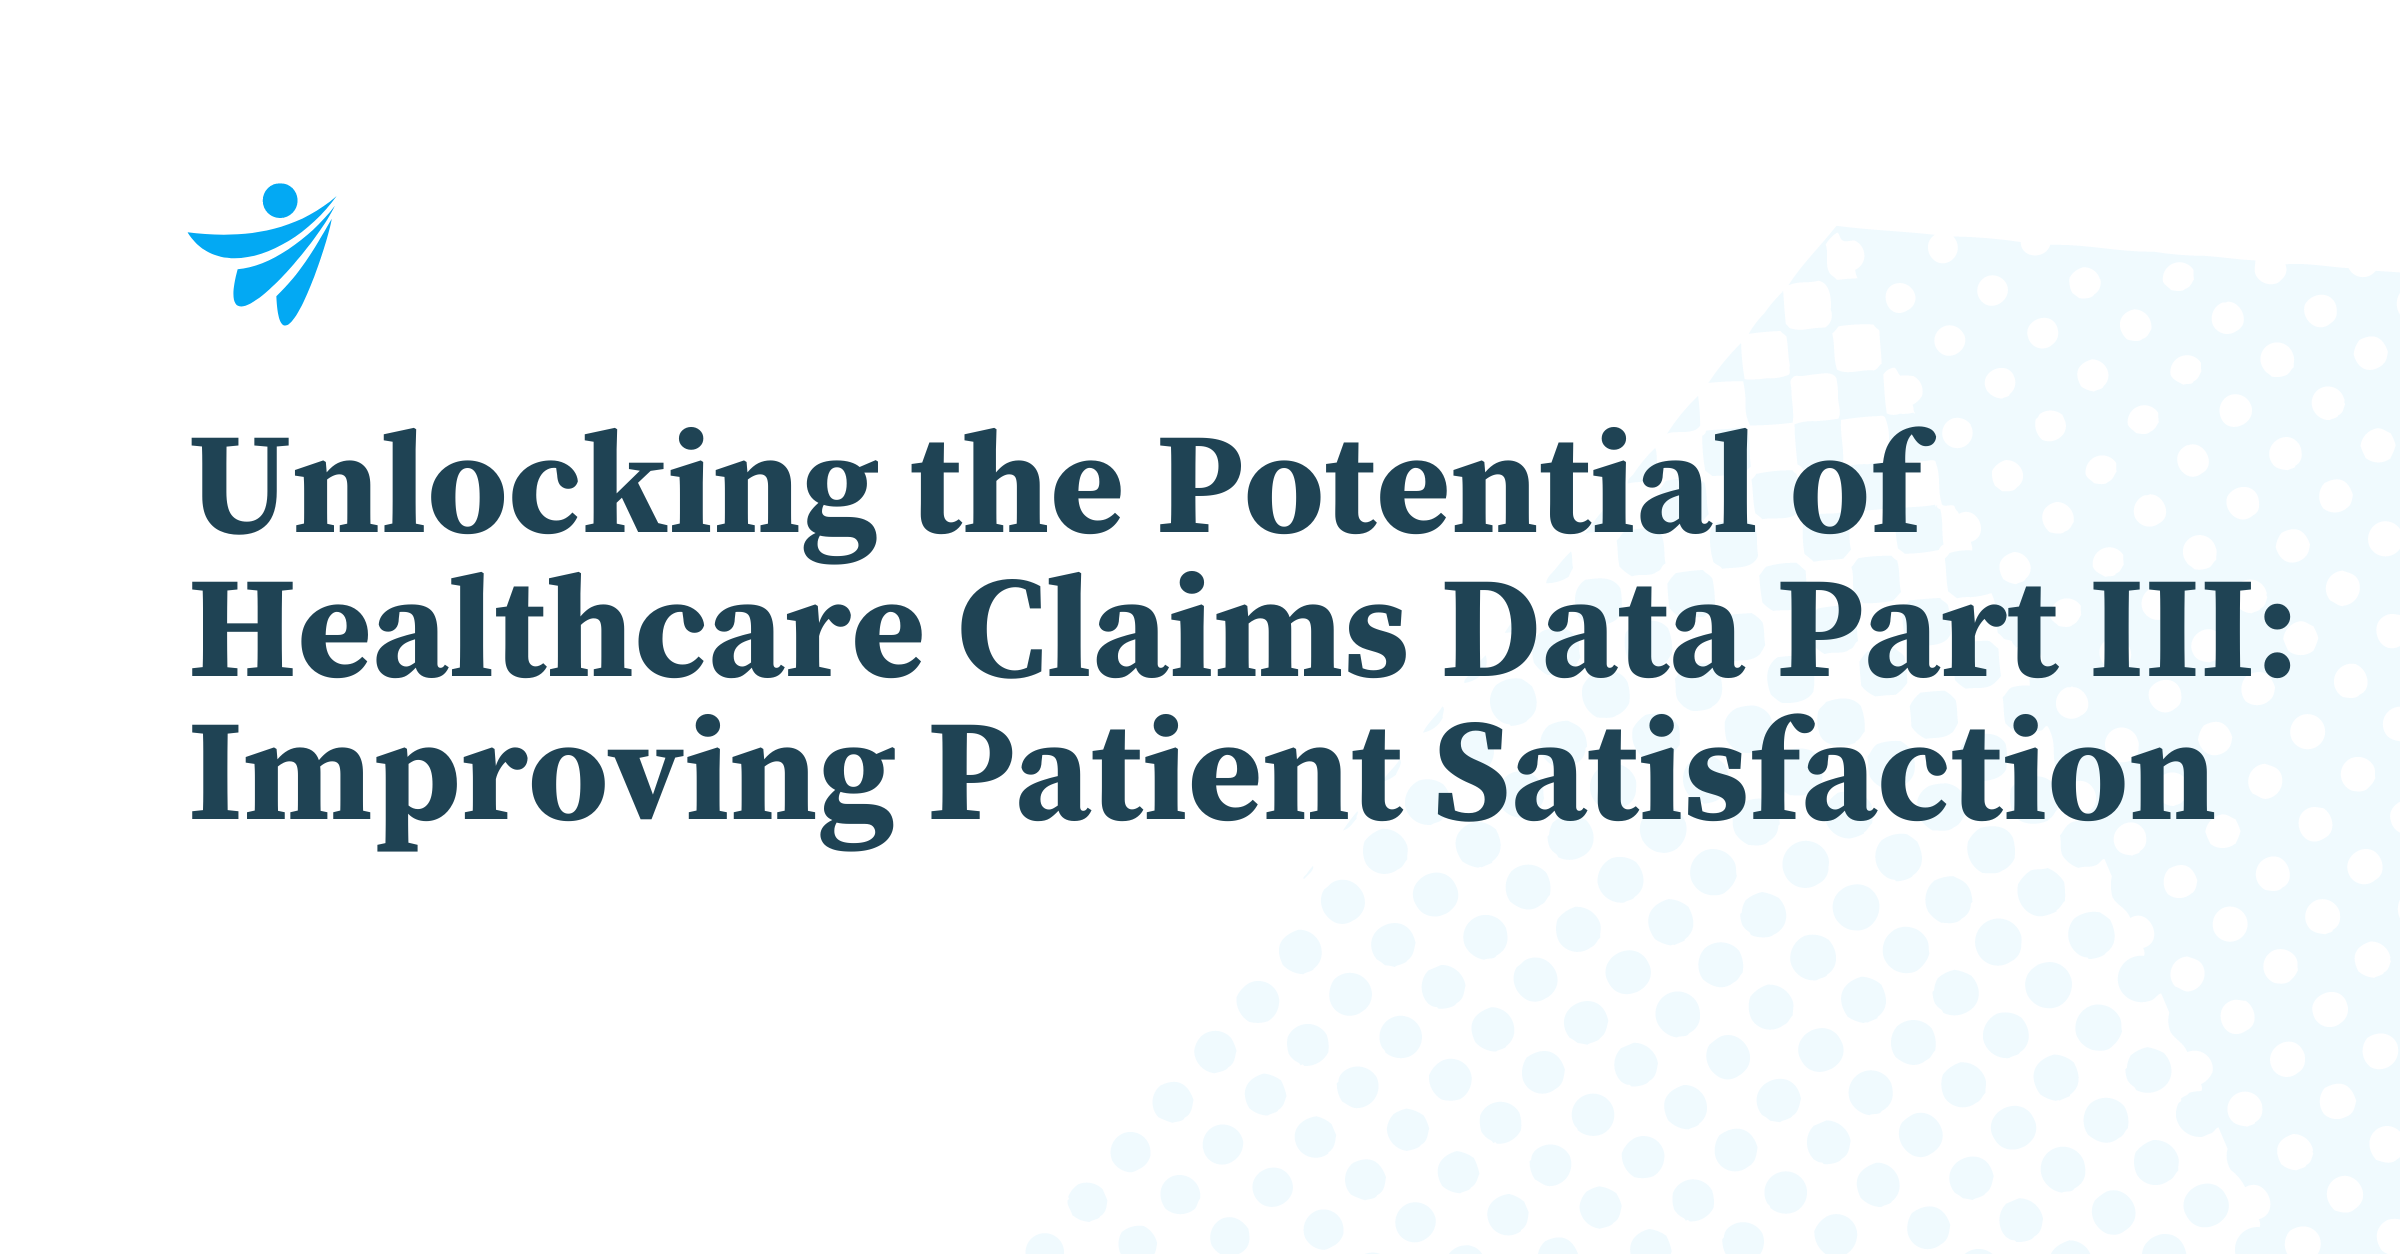 Thumbnail for Unlocking the Potential of Healthcare Claims Data Part III: Improving Patient Satisfaction  